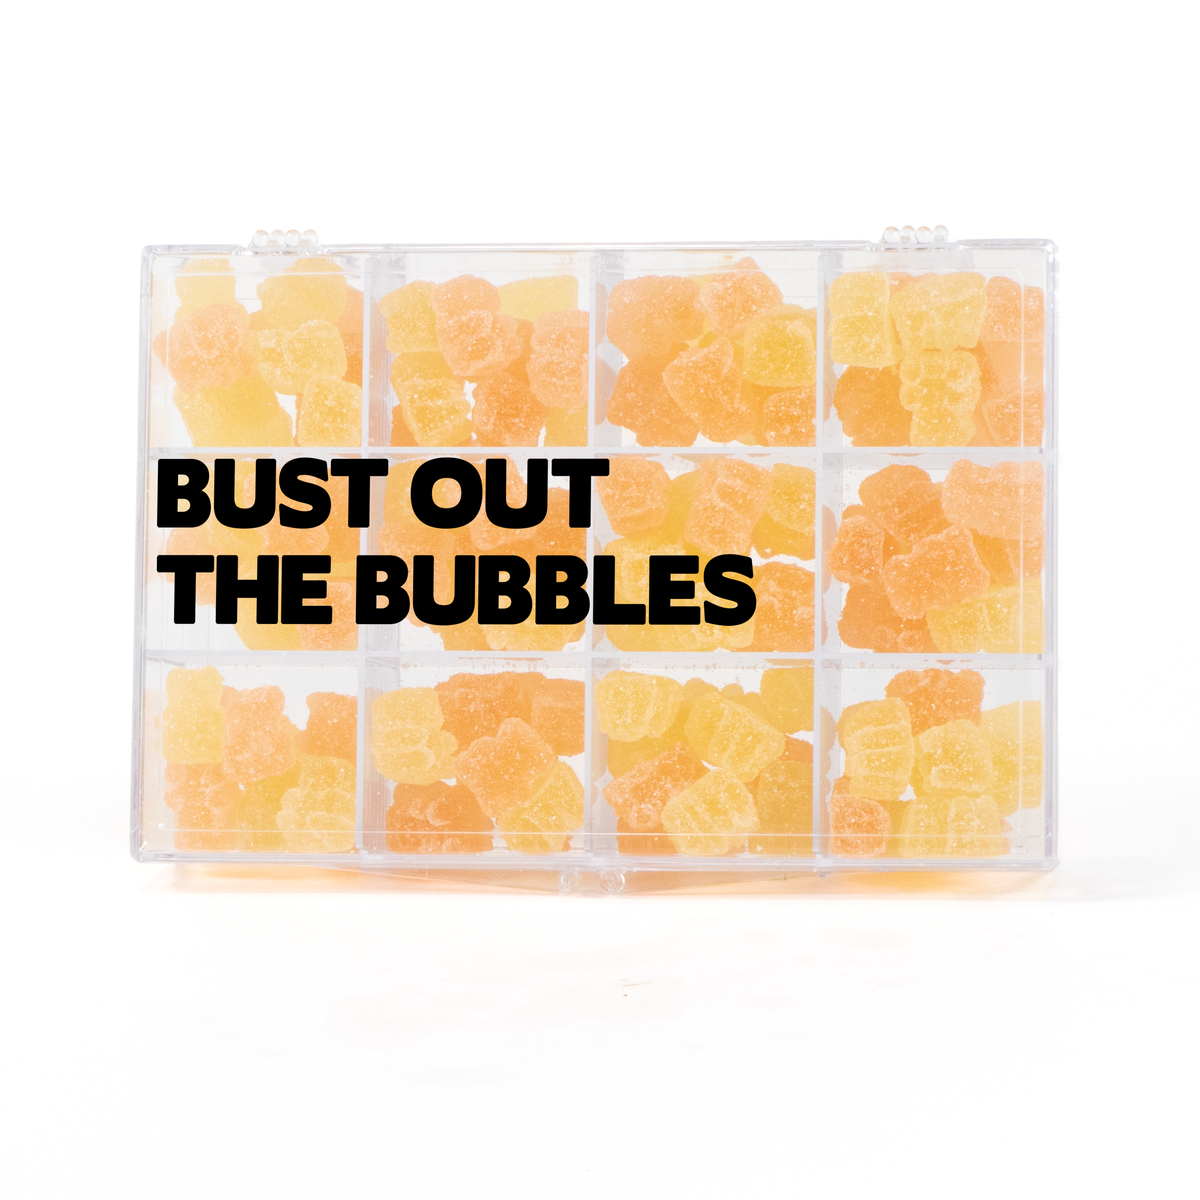 Bust out the Bubbles Snackle Box